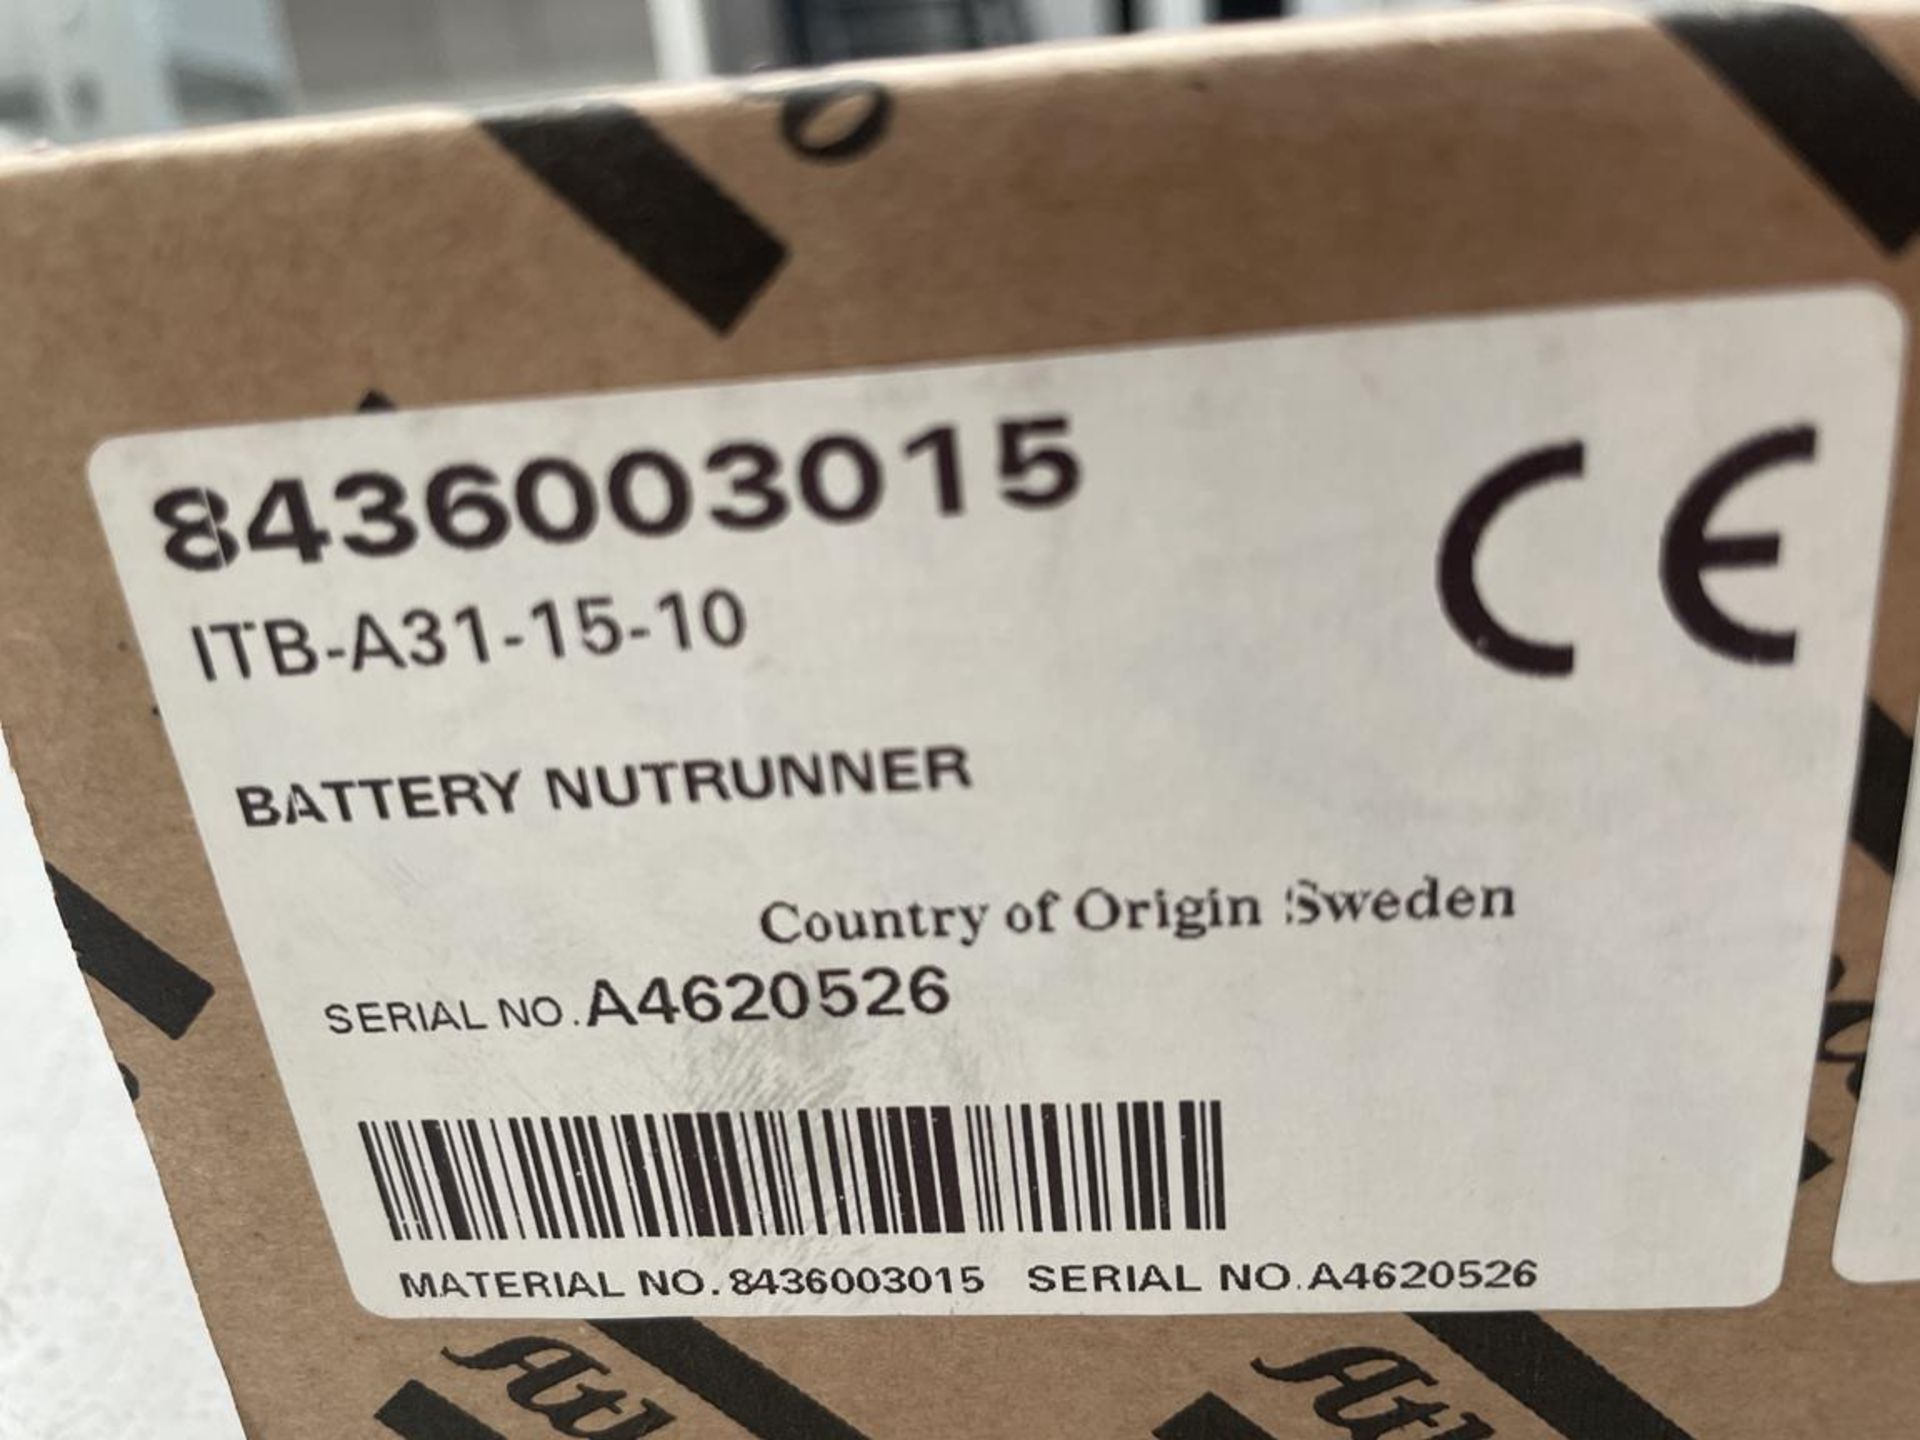 Atlas Copco, ITB-A31-15-10 battery nut runner (boxed and unused) - Image 2 of 2